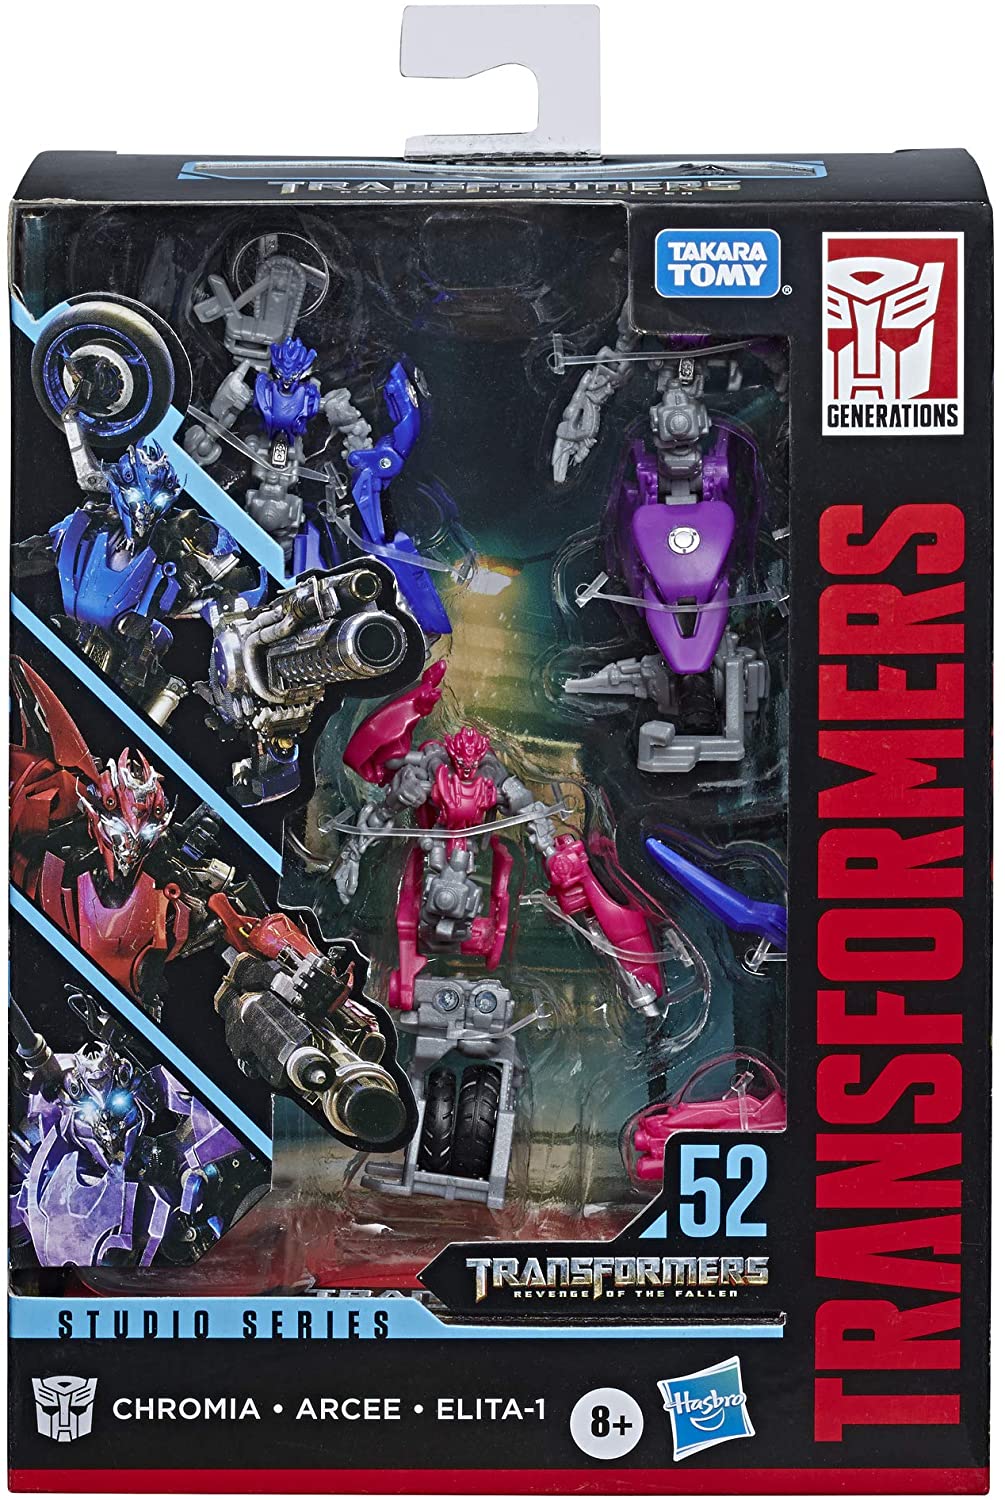 Transformers Toy Studio Series 52 Deluxe Transformers: The Revenge Arcee Ch